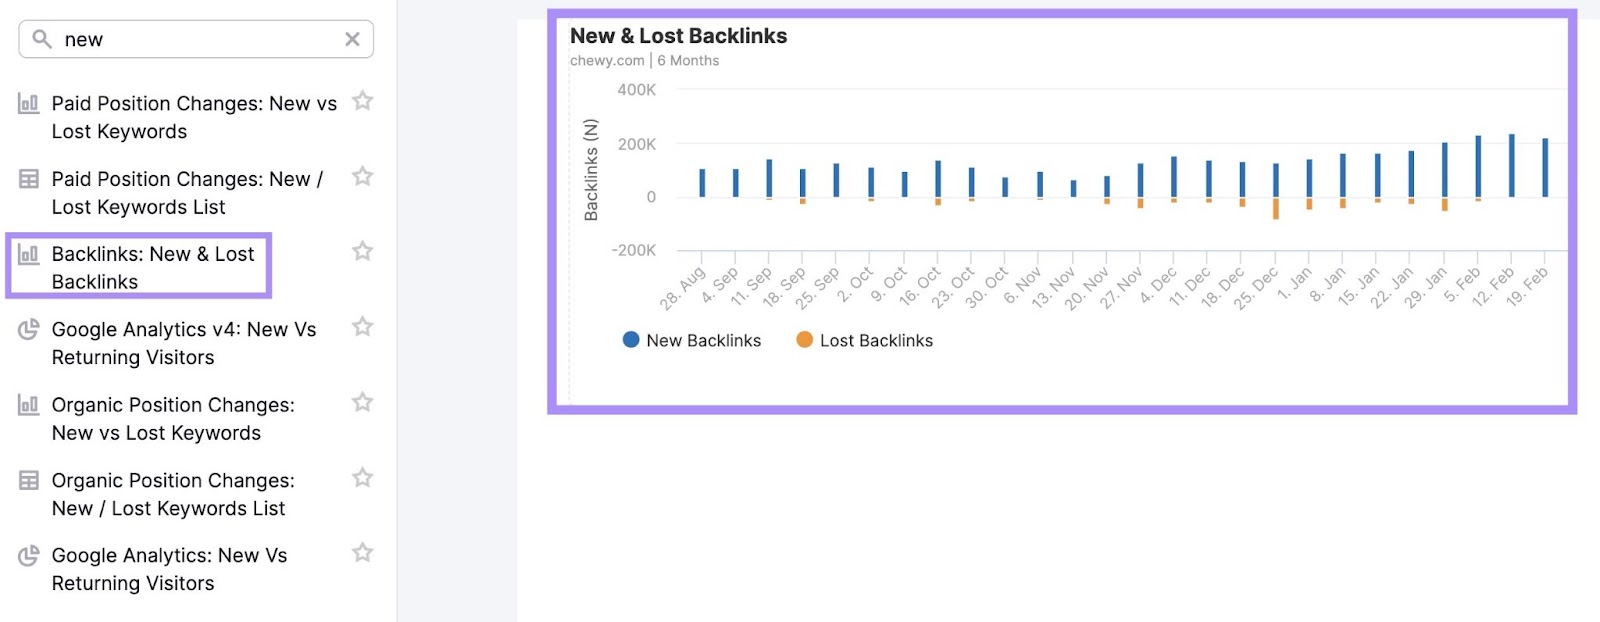 An example of a graph widget in My Reports showing “New & Lost Backlinks”